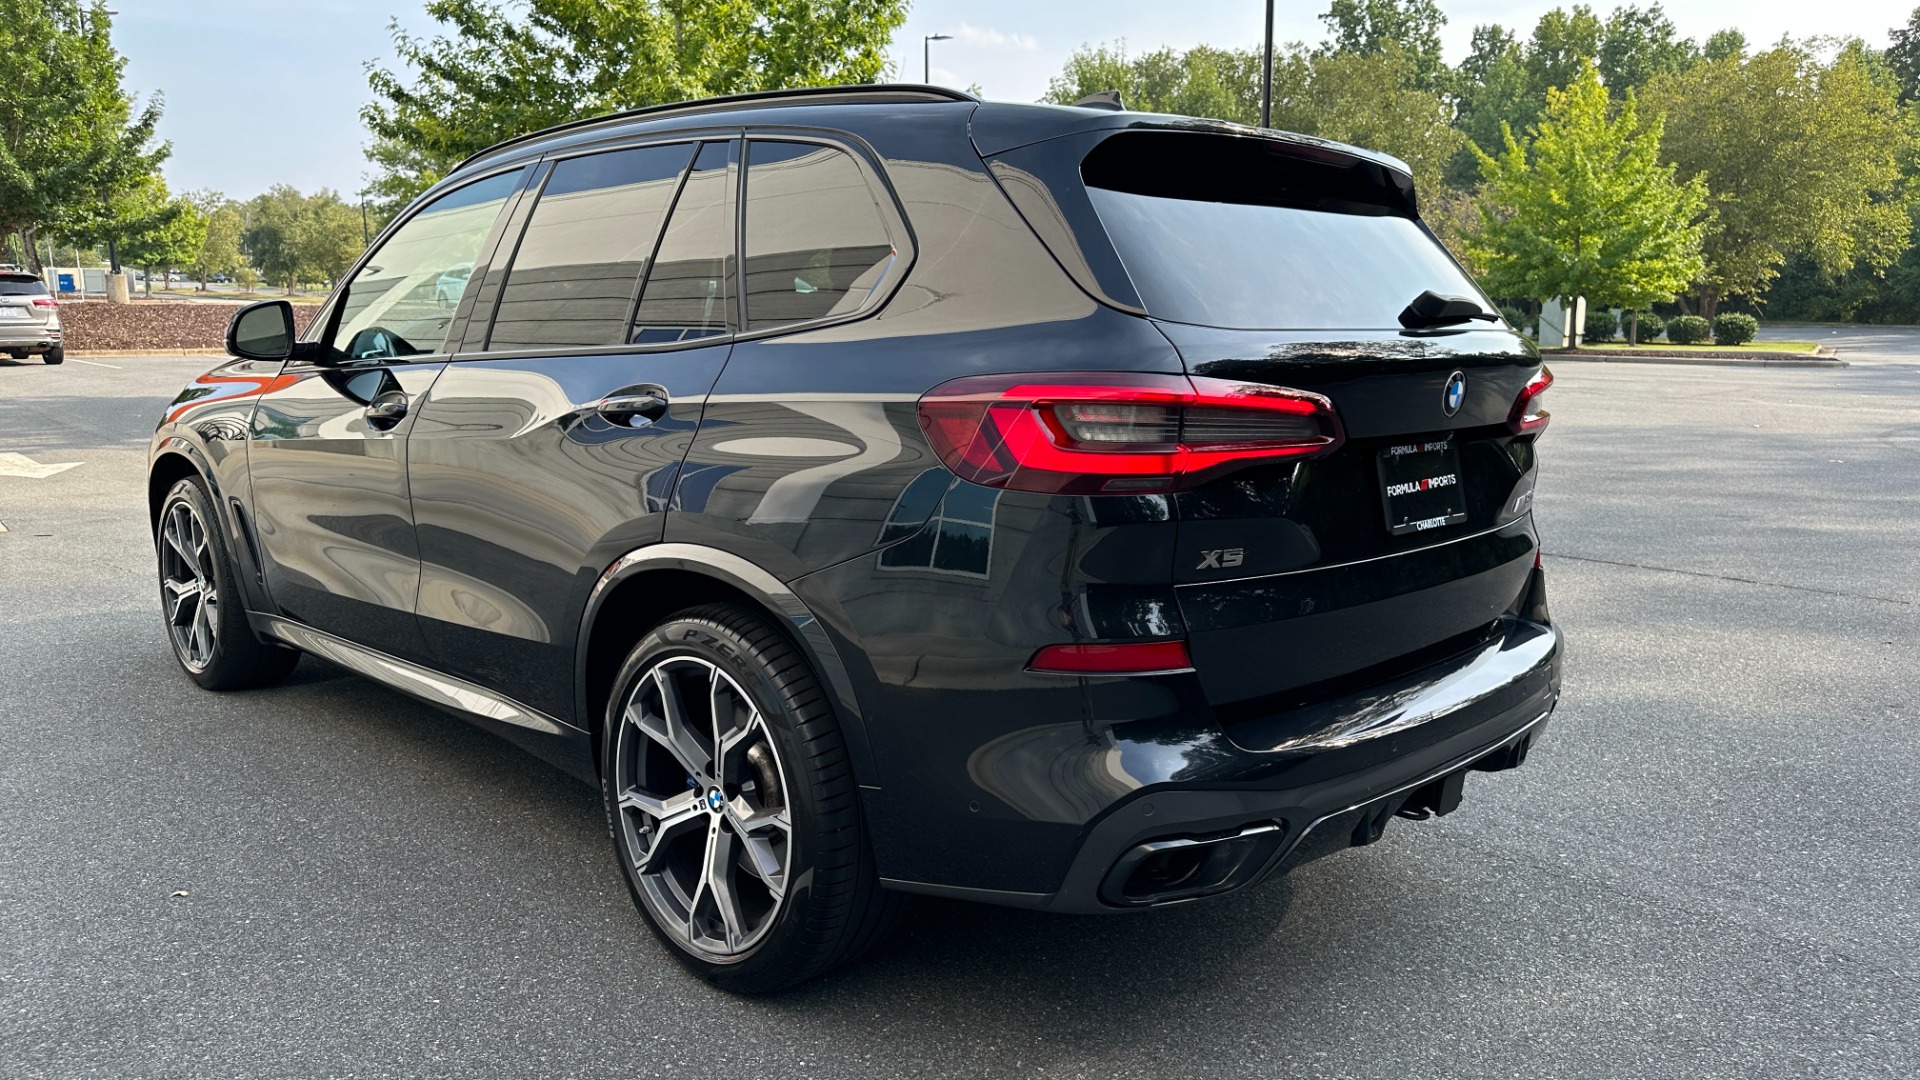 Used 2020 BMW X5 M50i / PREMIUM / TRAILER HITCH / BLACK TRIM / PARKING ASSIST for sale $54,995 at Formula Imports in Charlotte NC 28227 4